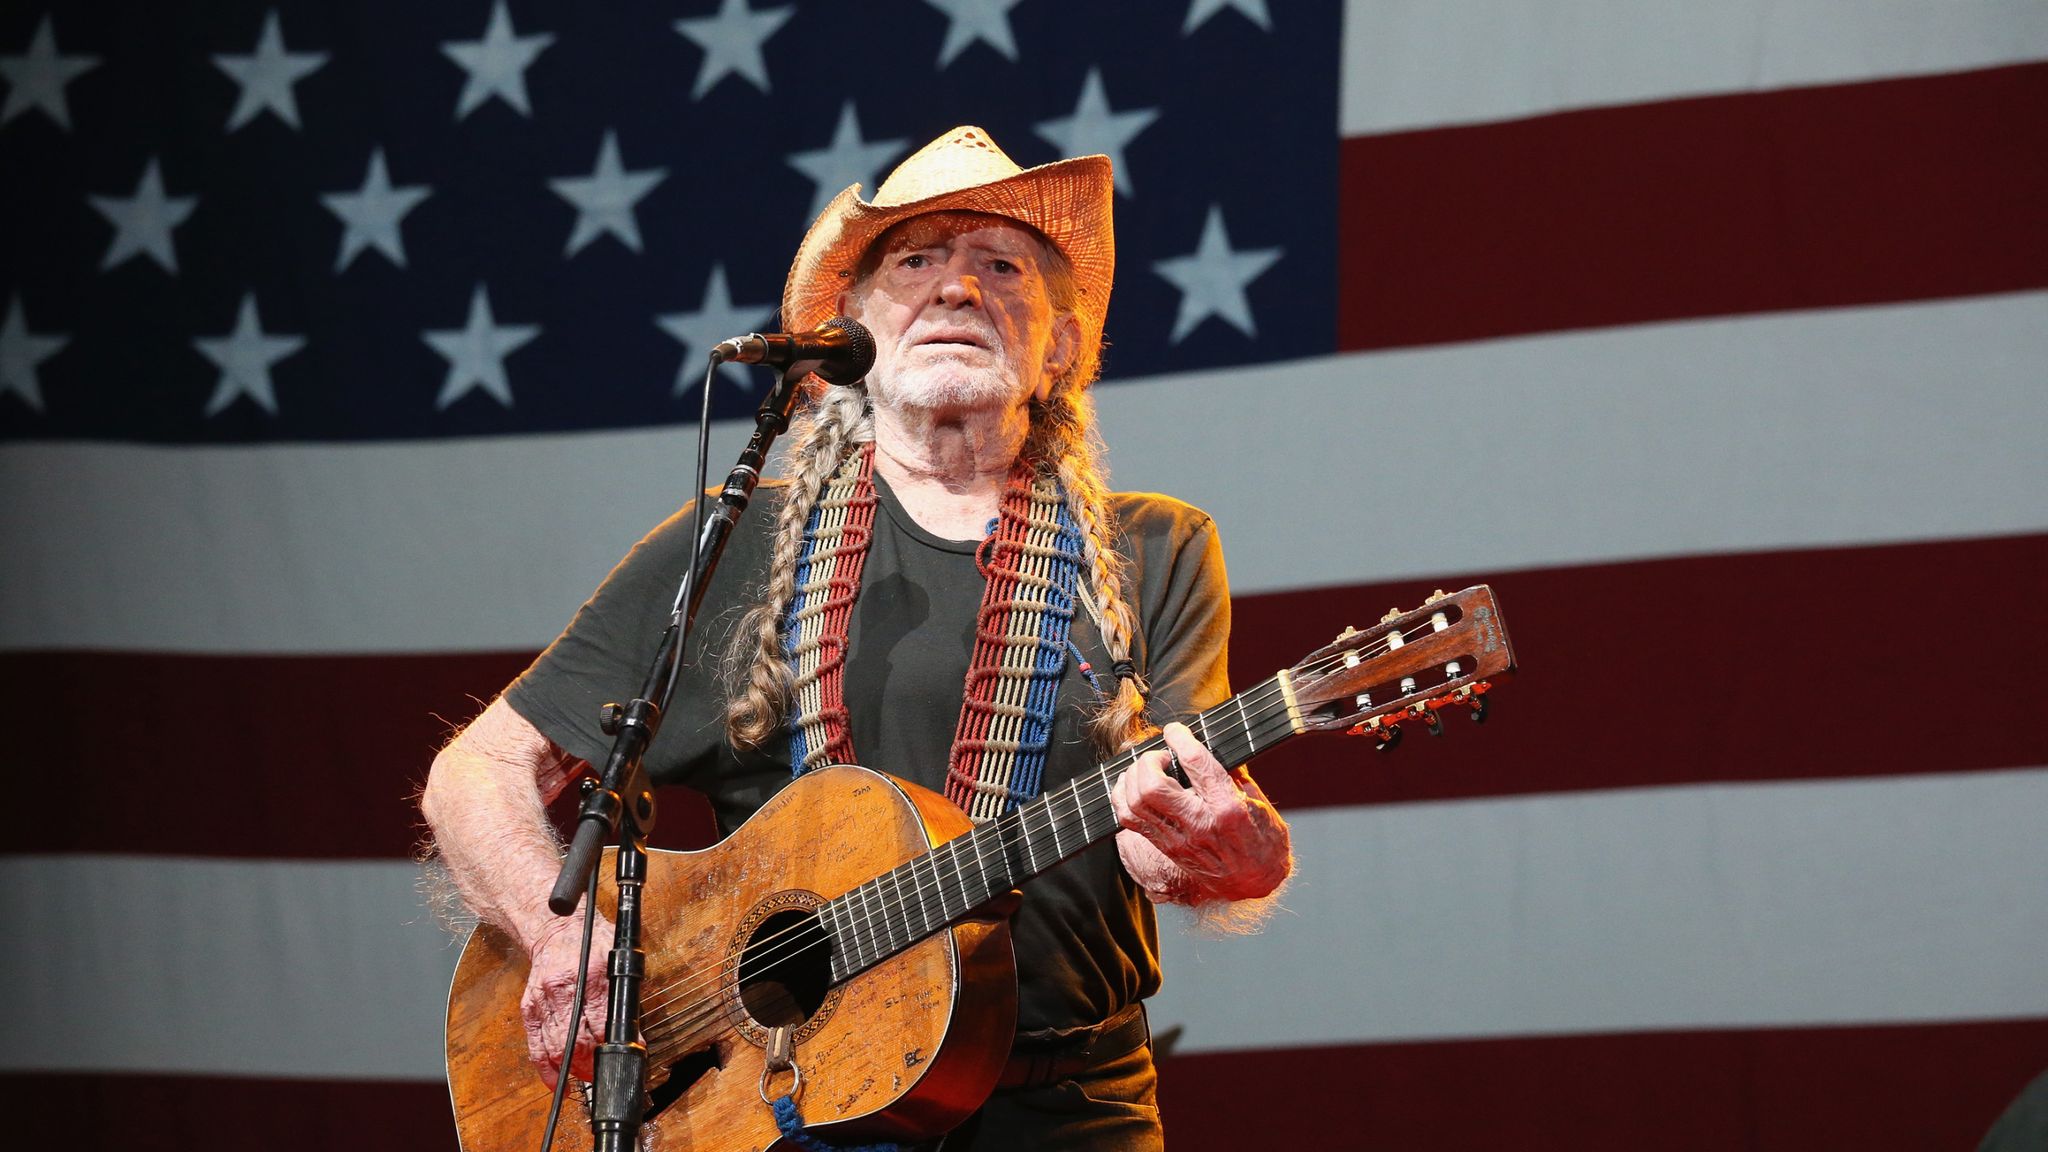 Willie Nelson Country music star cancels tour due to 'breathing